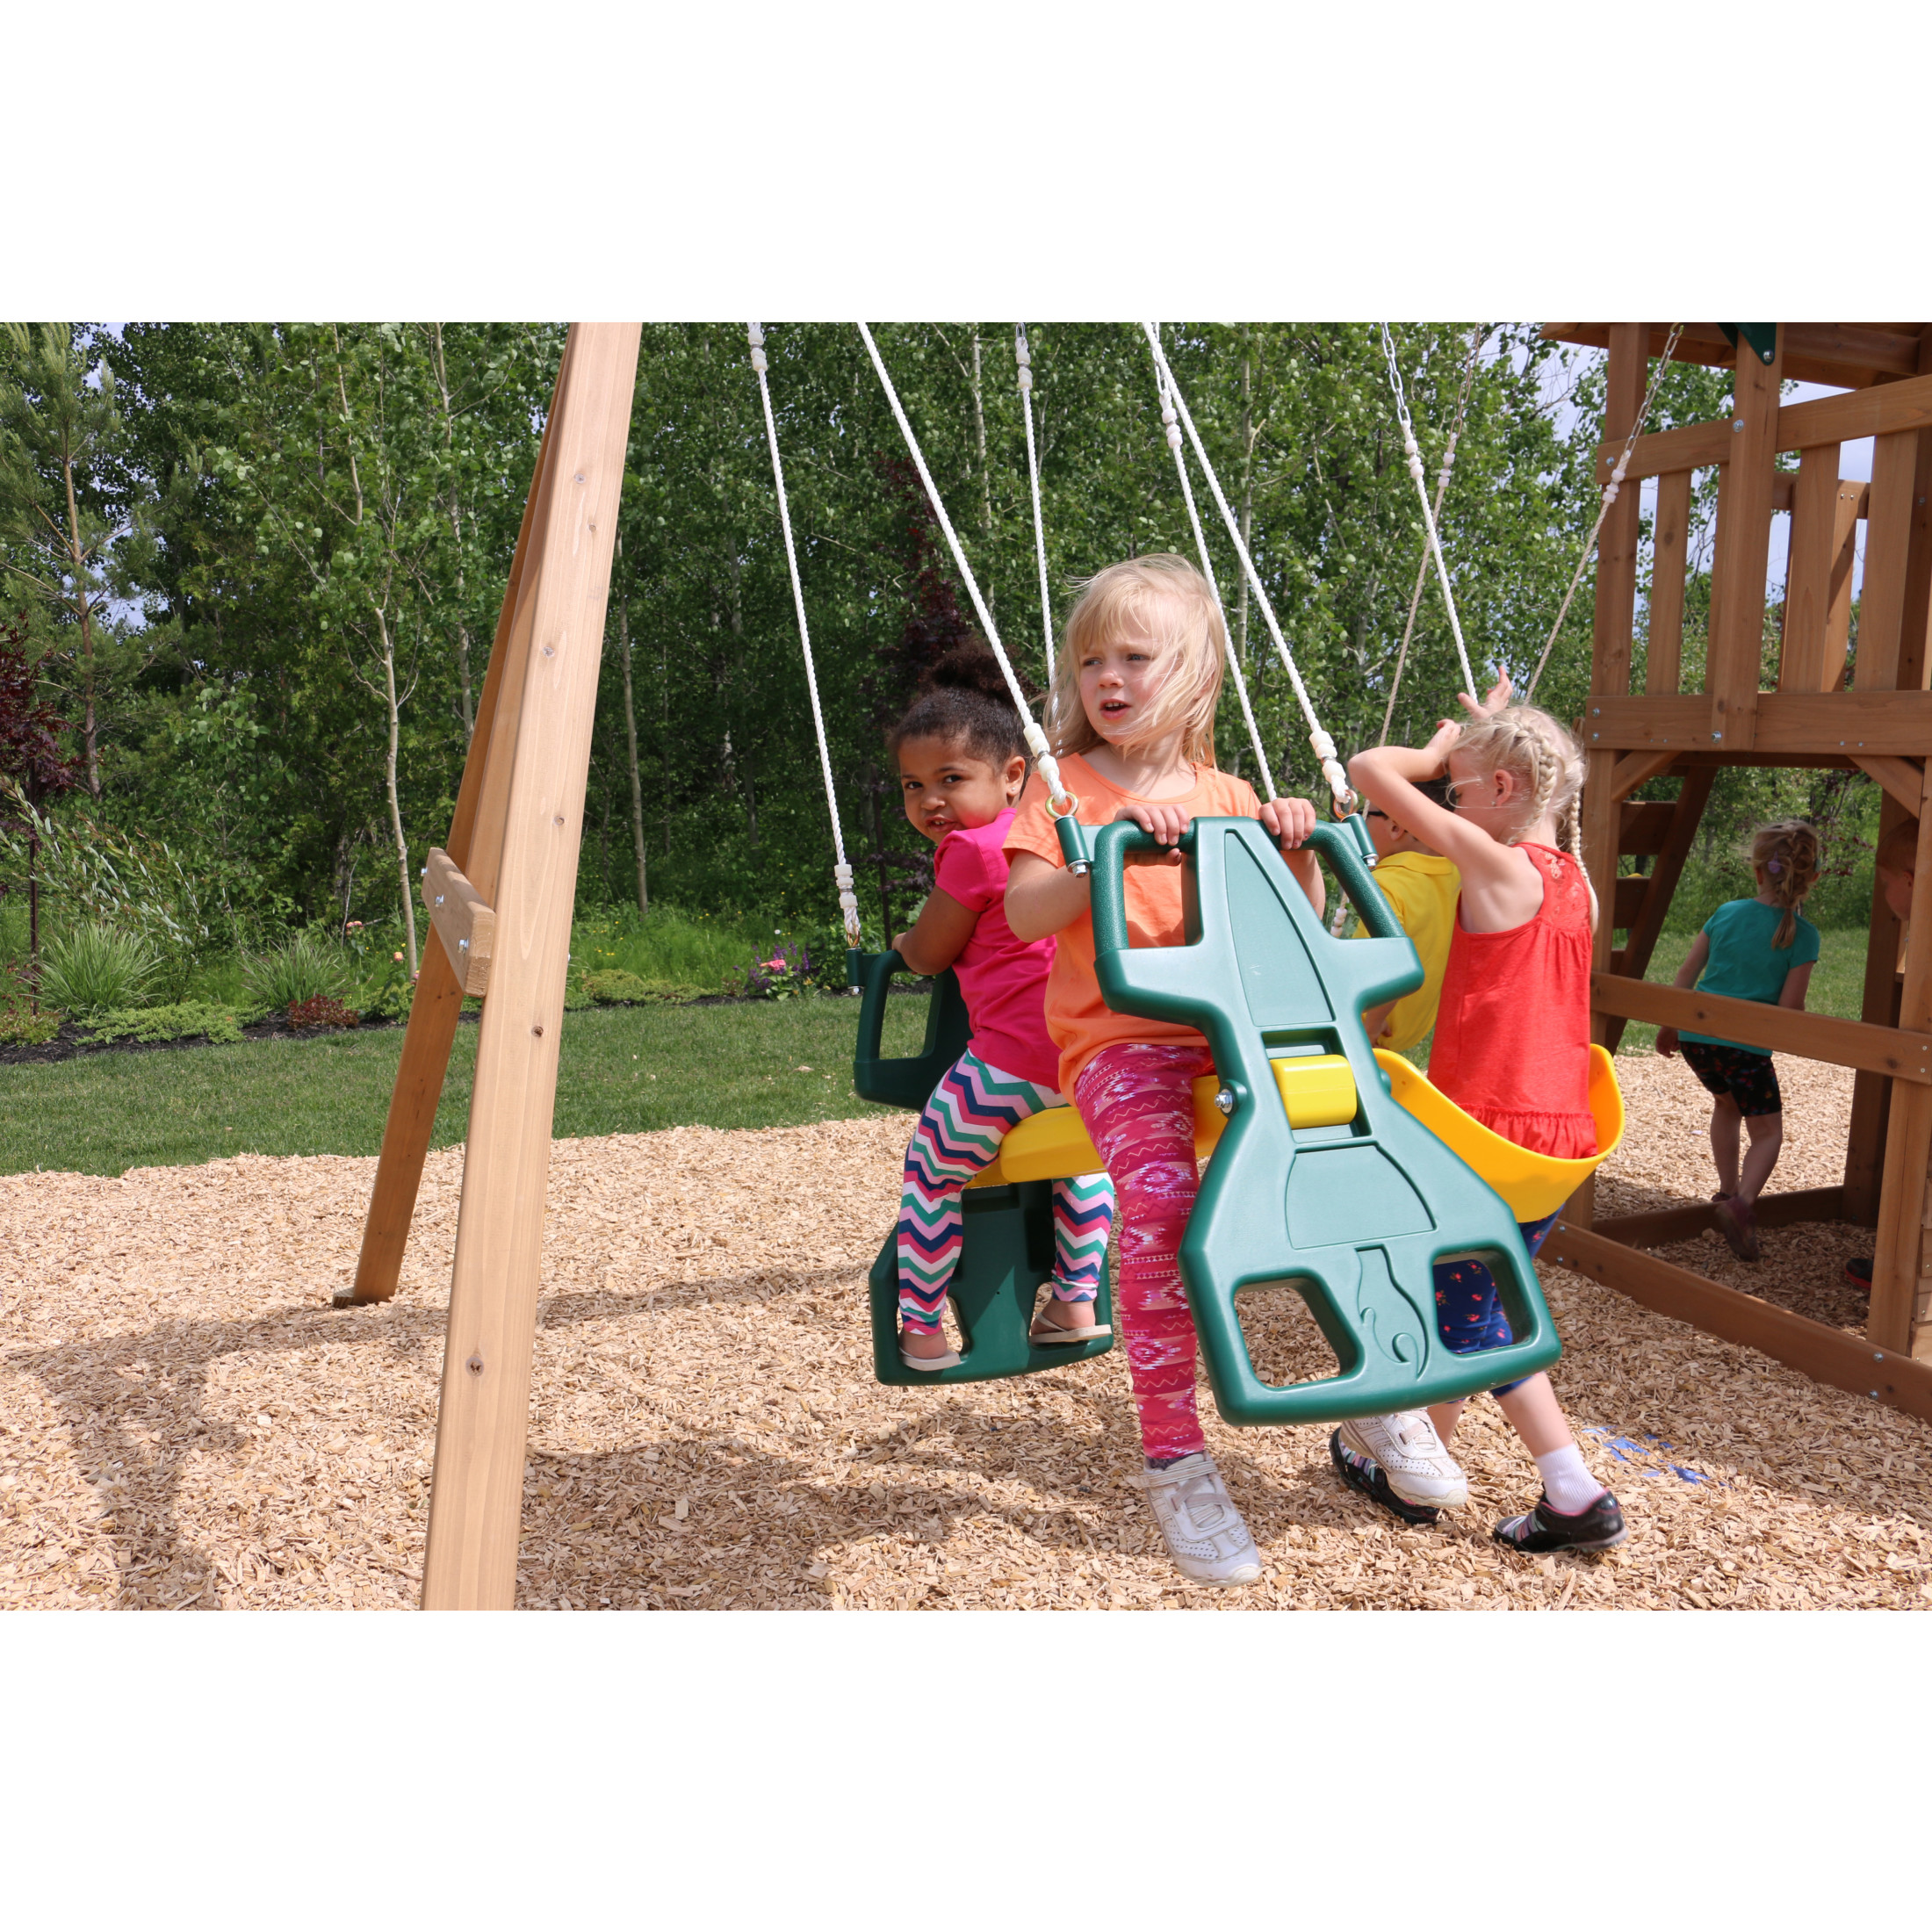 KidKraft Windale Wooden Swing Set / Playset with Clubhouse, Swings, Slide, Shaded Table and Bench - image 6 of 12